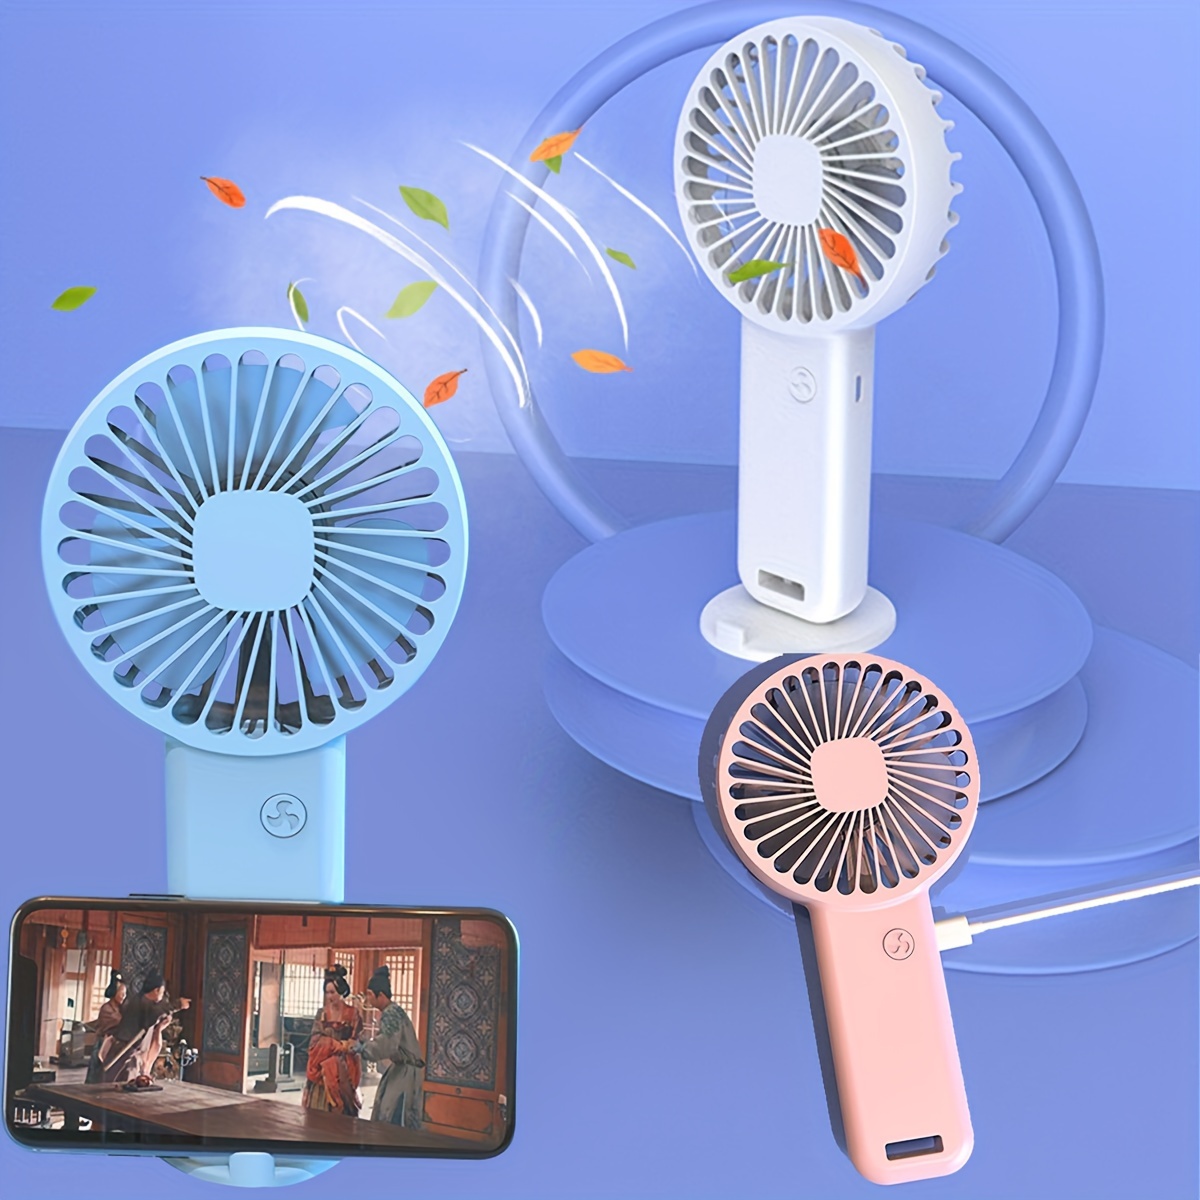 

Portable Usb Charging Fan, Mini Fan With 3 Speed Settings And Phone Holder, Ideal For Desk And Watching Videos